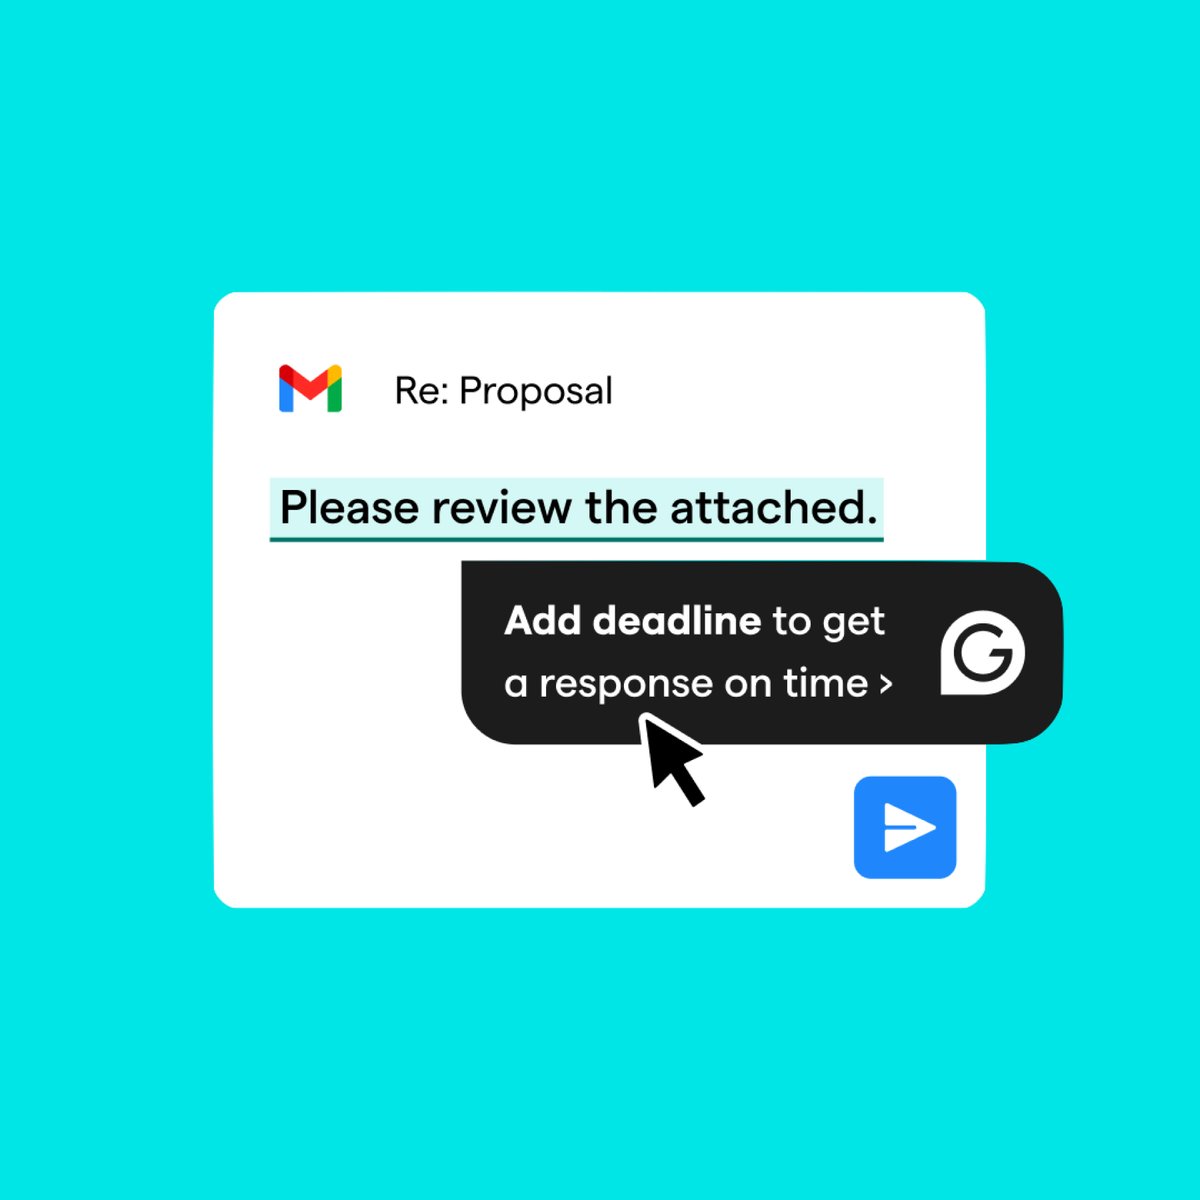 PSA: Always add a deadline to your asks to get a faster response. ⏰ Better yet, use Grammarly’s newest feature, strategic suggestions, to help you include all the info you need to move your work forward: gram.ly/3Jcr4s5